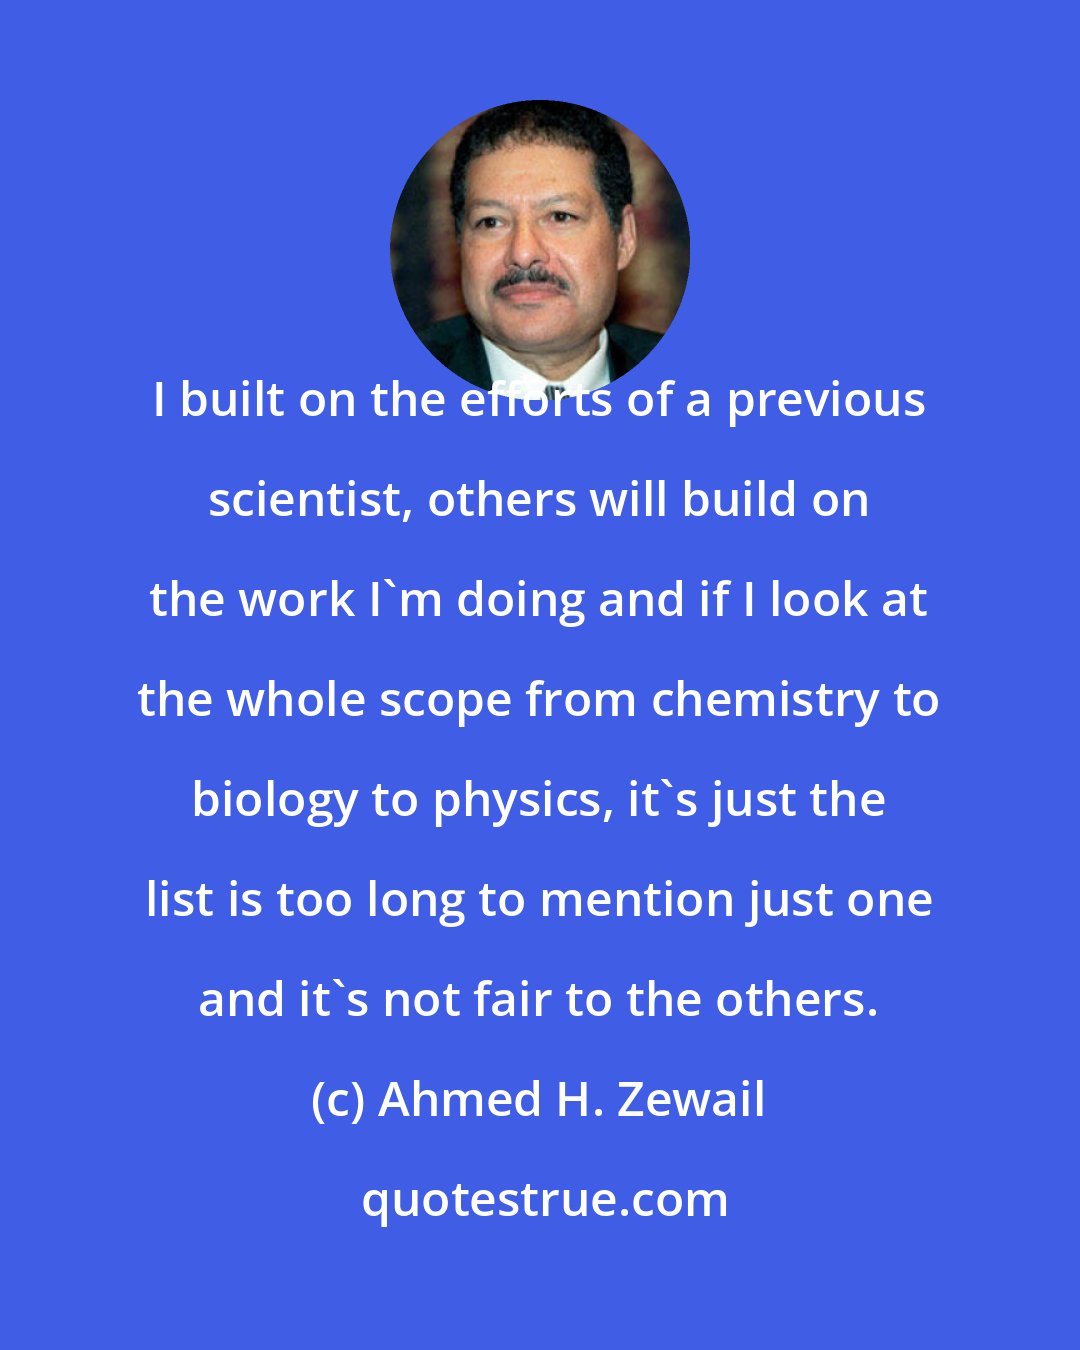 Ahmed H. Zewail: I built on the efforts of a previous scientist, others will build on the work I'm doing and if I look at the whole scope from chemistry to biology to physics, it's just the list is too long to mention just one and it's not fair to the others.